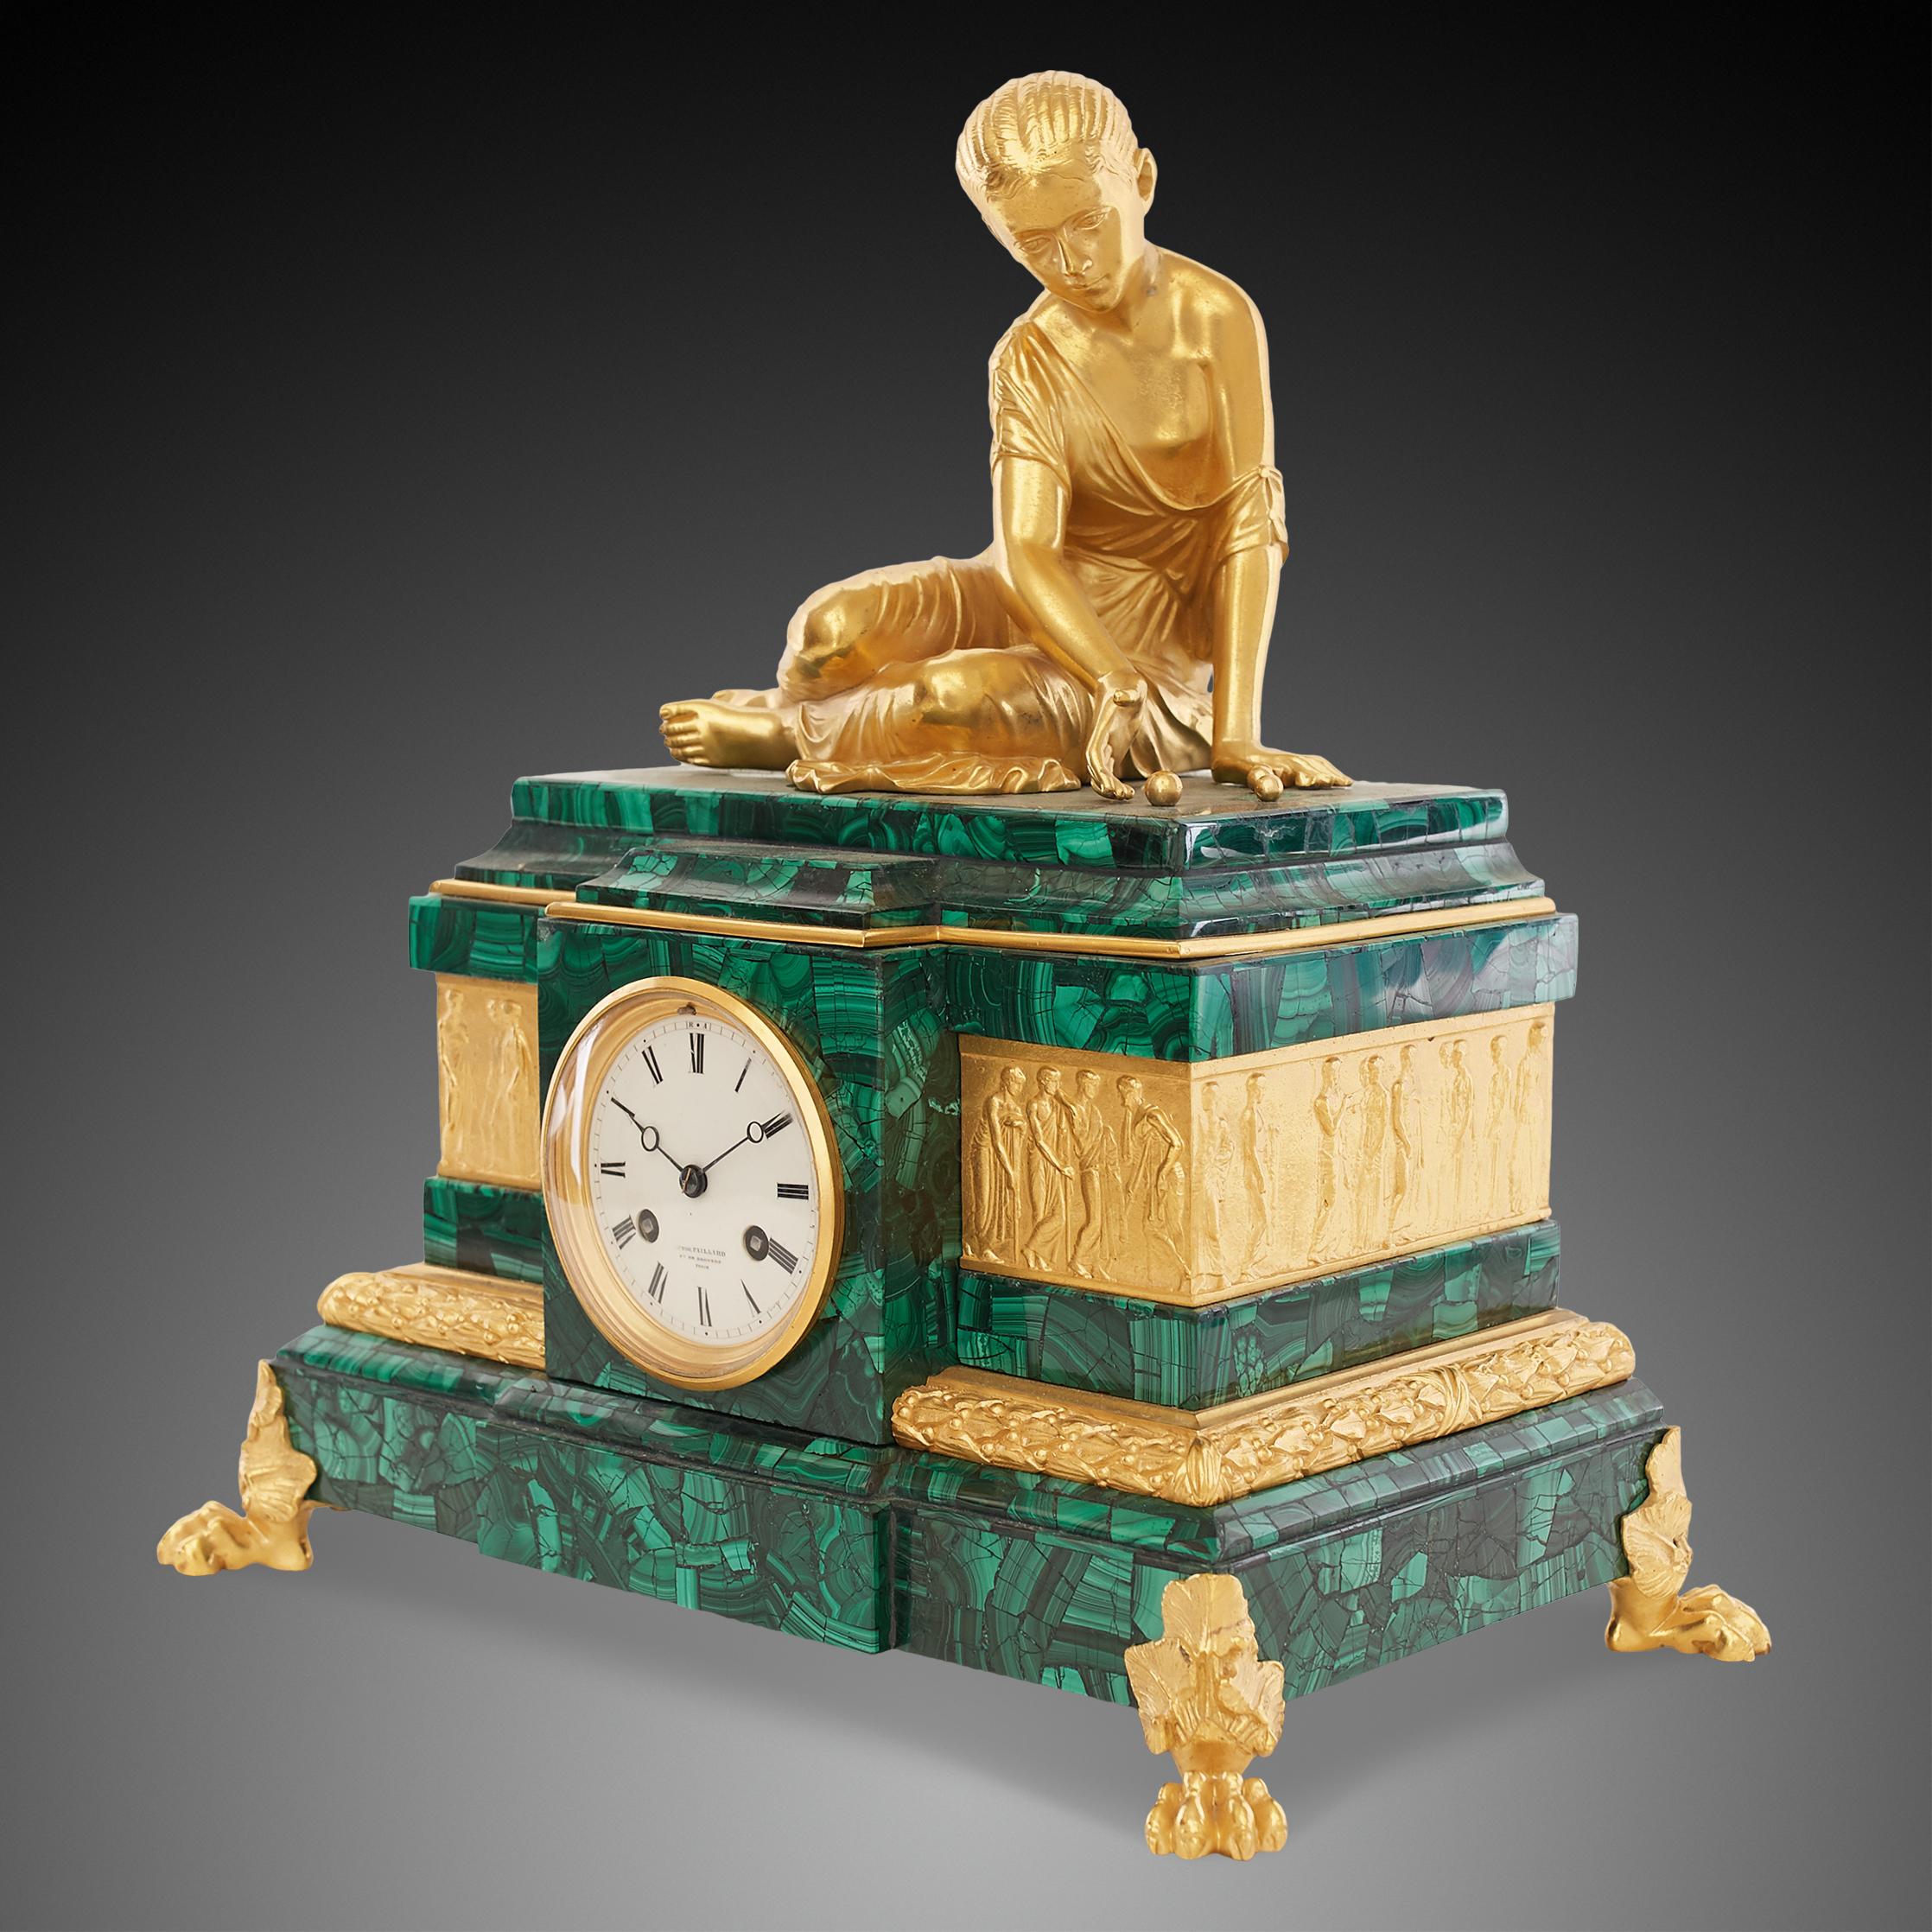 A beautiful clock made of bronze and malachite with an intense color. The clock has four decorated legs and on its top there is a figure of a sitting woman in golden color. The clock is in excellent and perfect working condition. In addition, it has